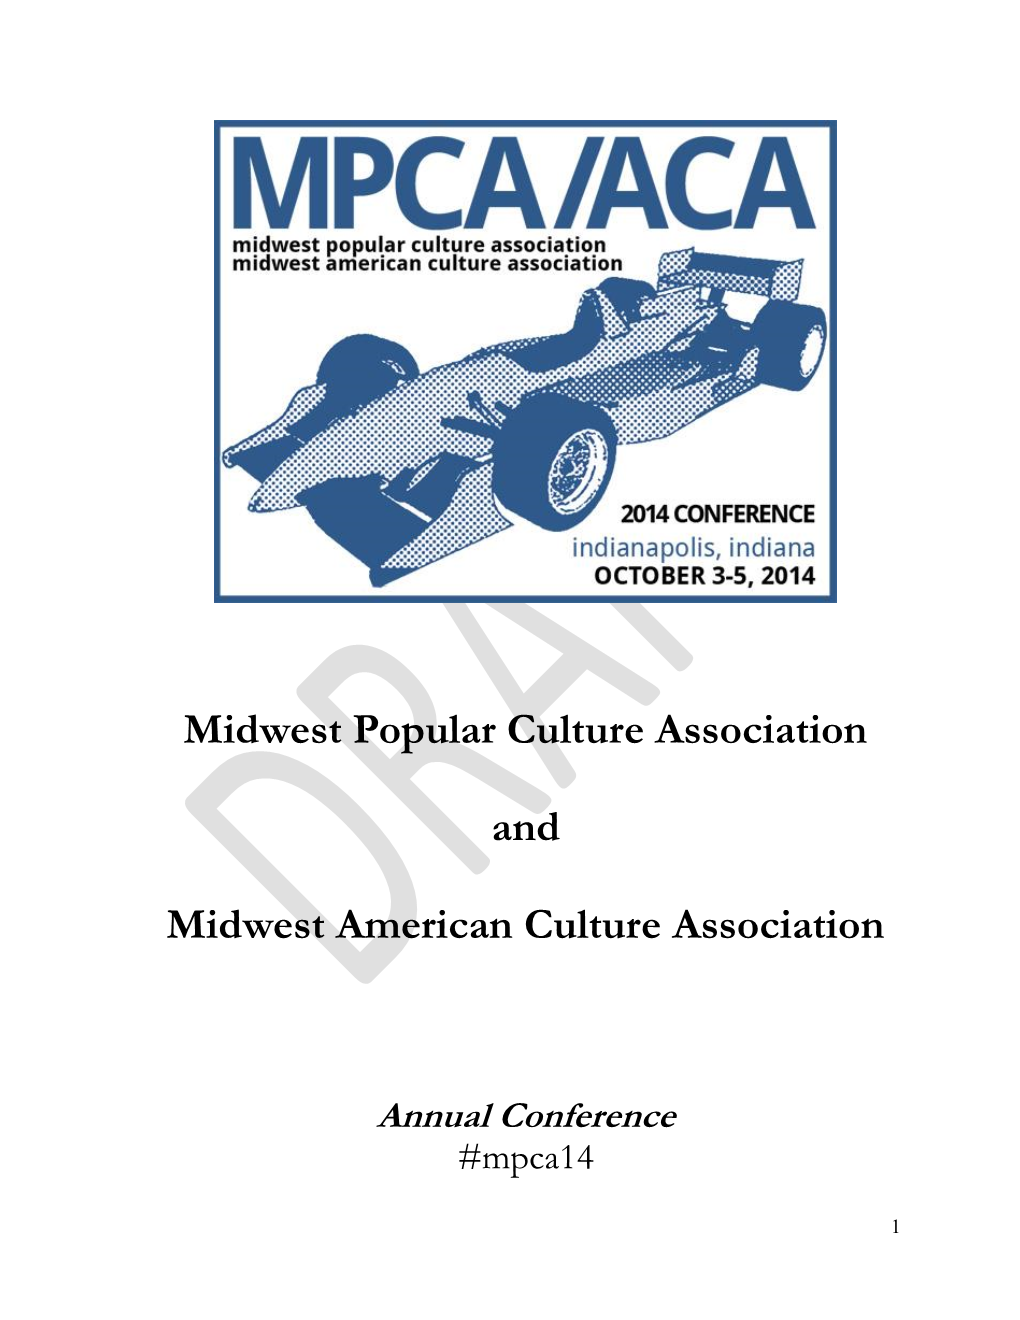 Midwest Popular Culture Association and Midwest American Culture